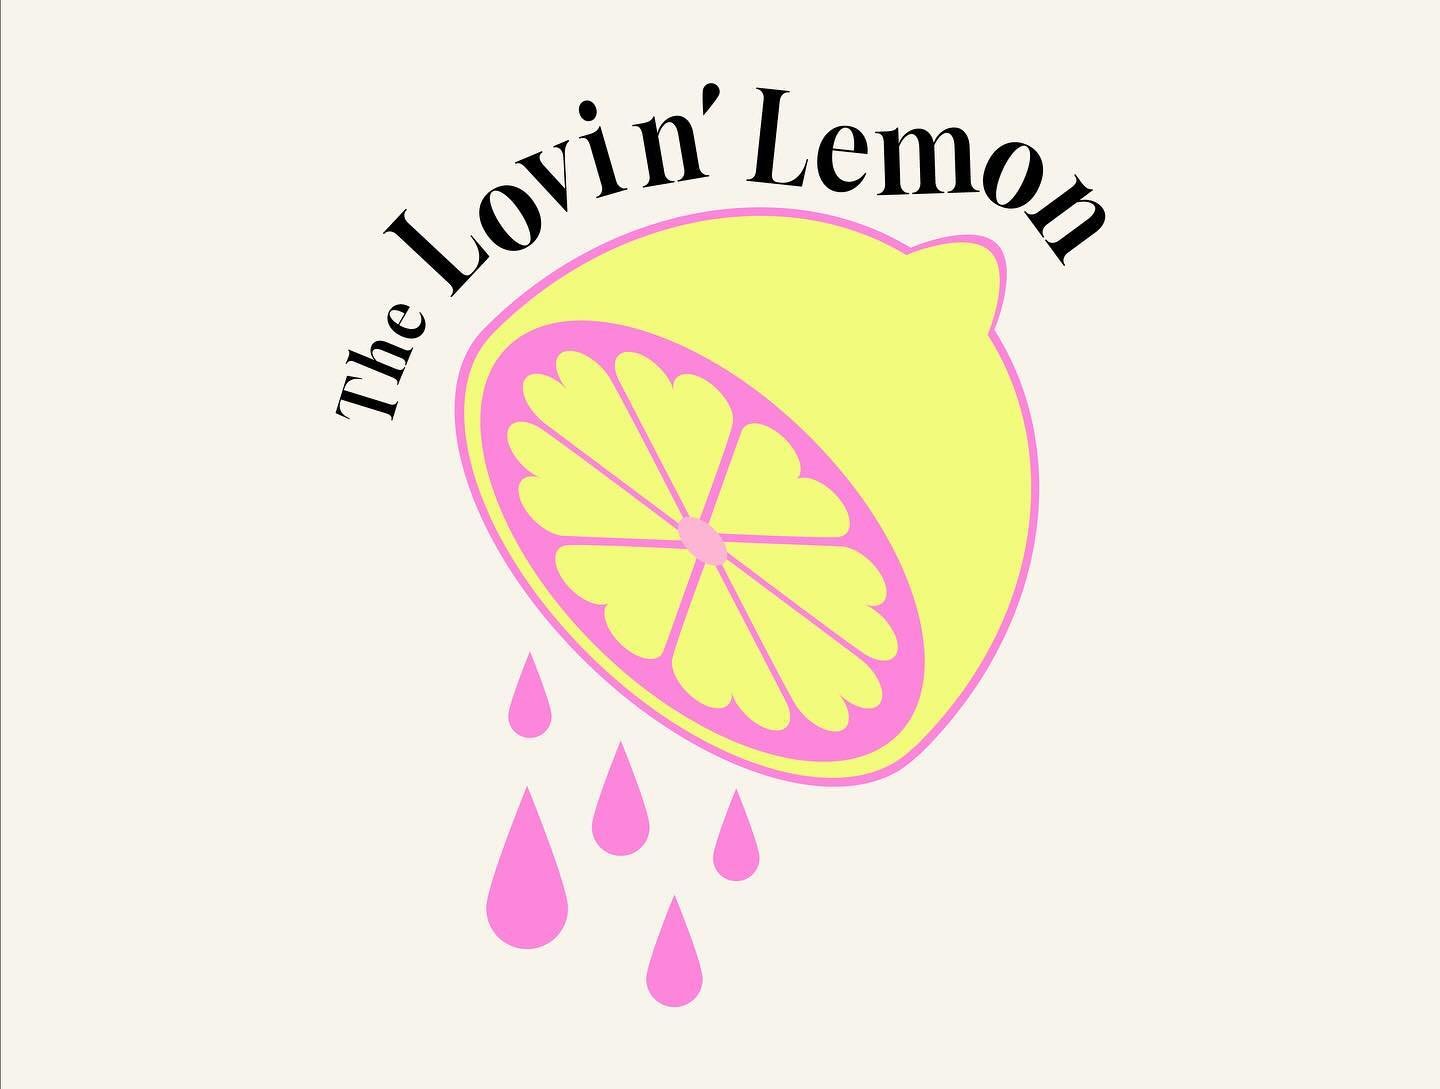 super cute &lsquo;n juicy lemon! 🍋 although it is a concept on hold for now, one of my fav projects ever had to be this sweet lil&rsquo; logo branding suite for my dear friend @thelovinlemon &lt;3 these were ideas presented as part of the logo desig